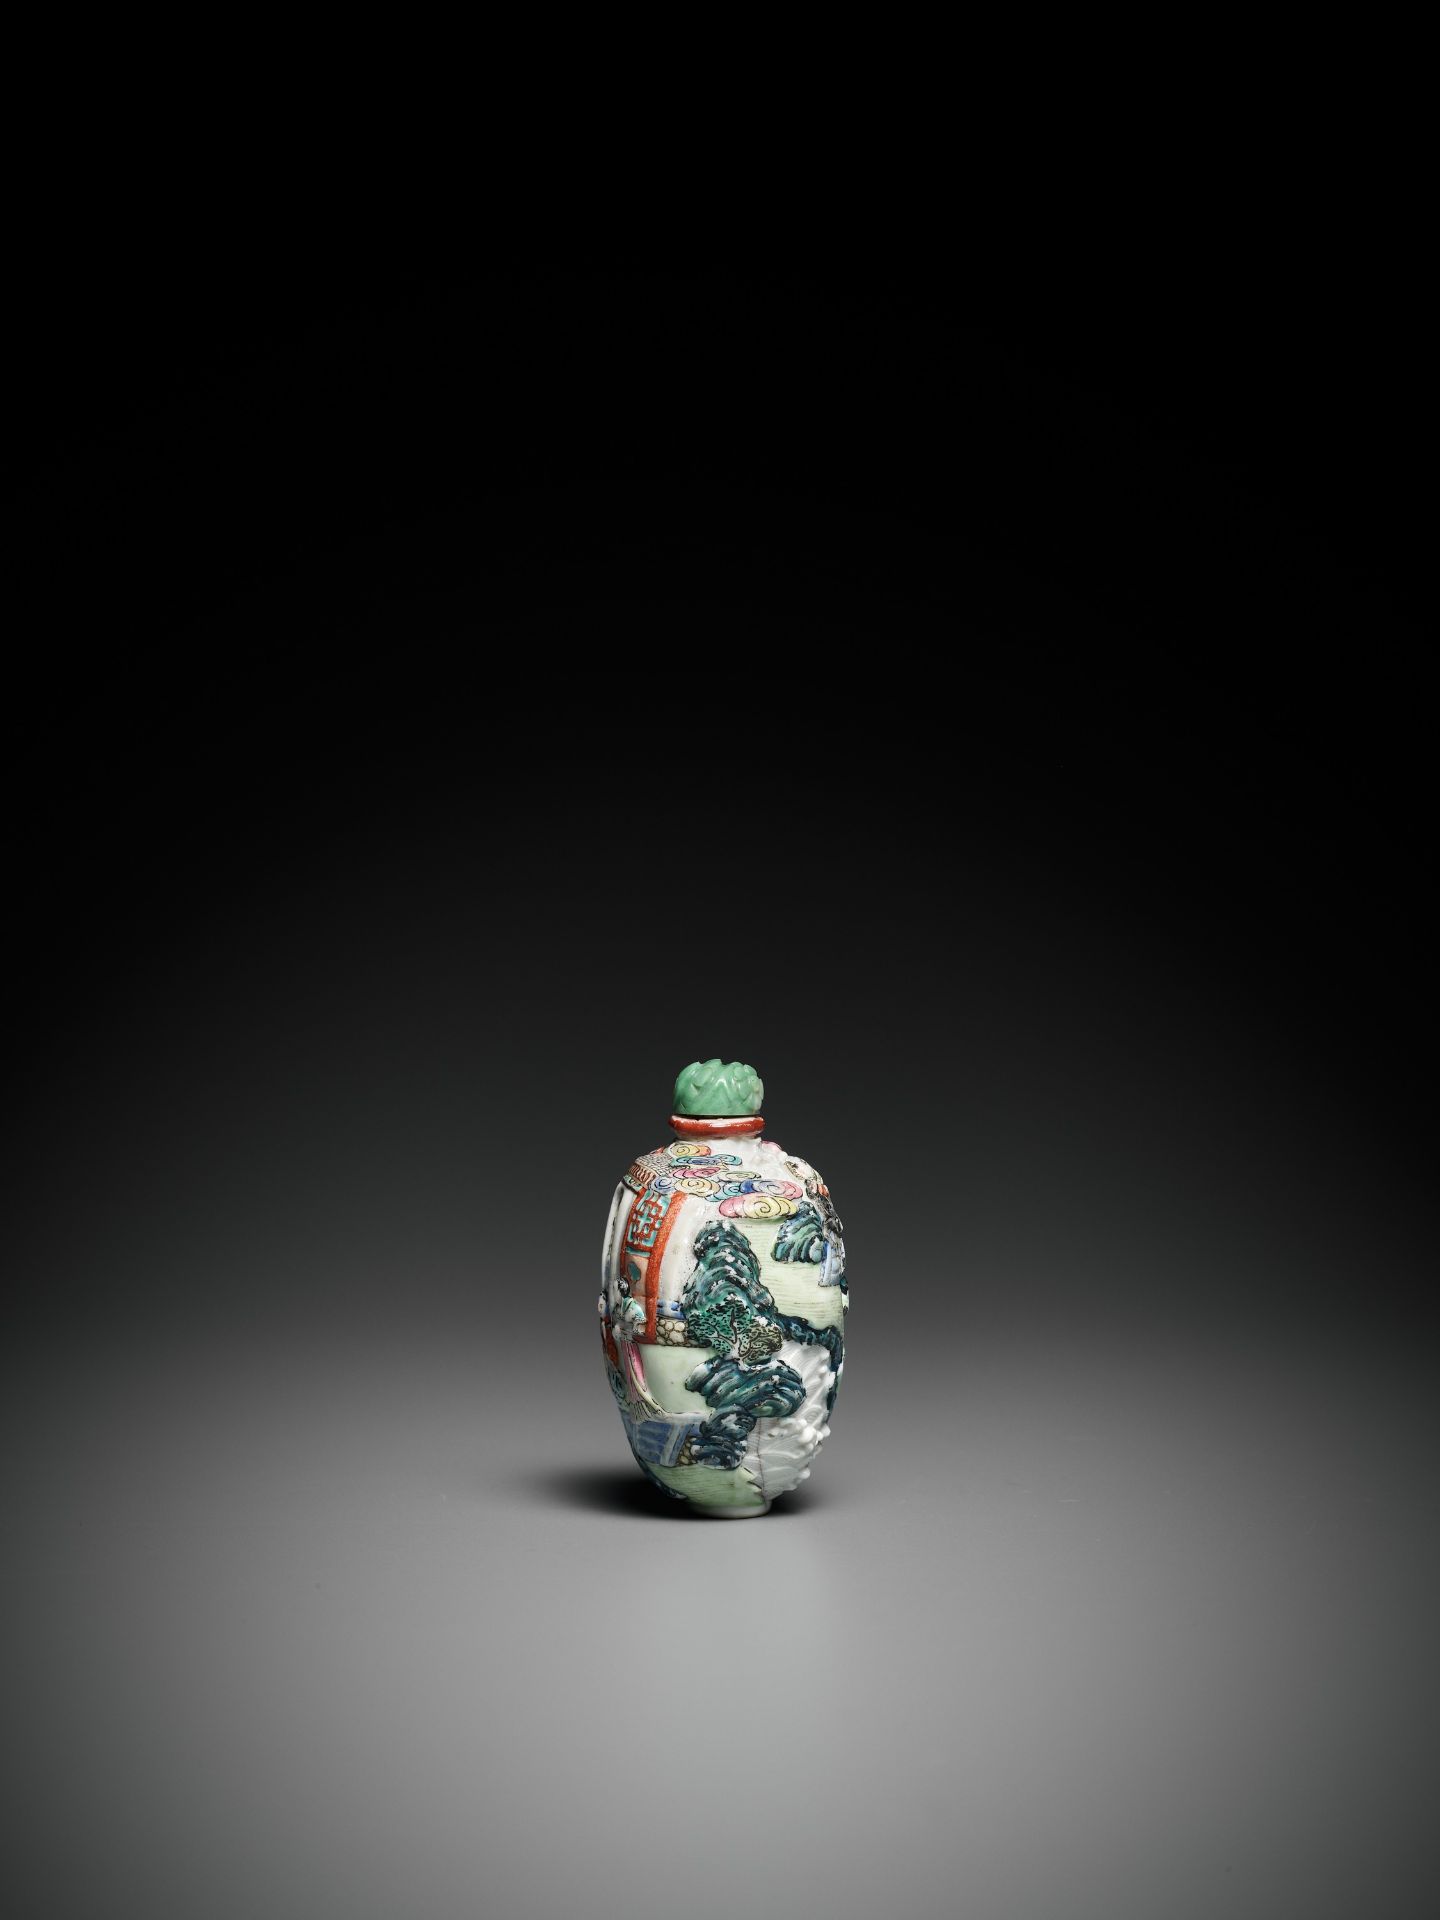 AN IMPERIAL MOLDED AND ENAMELED PORCELAIN SNUFF BOTTLE, JIAQING MARK AND PERIOD - Image 6 of 8